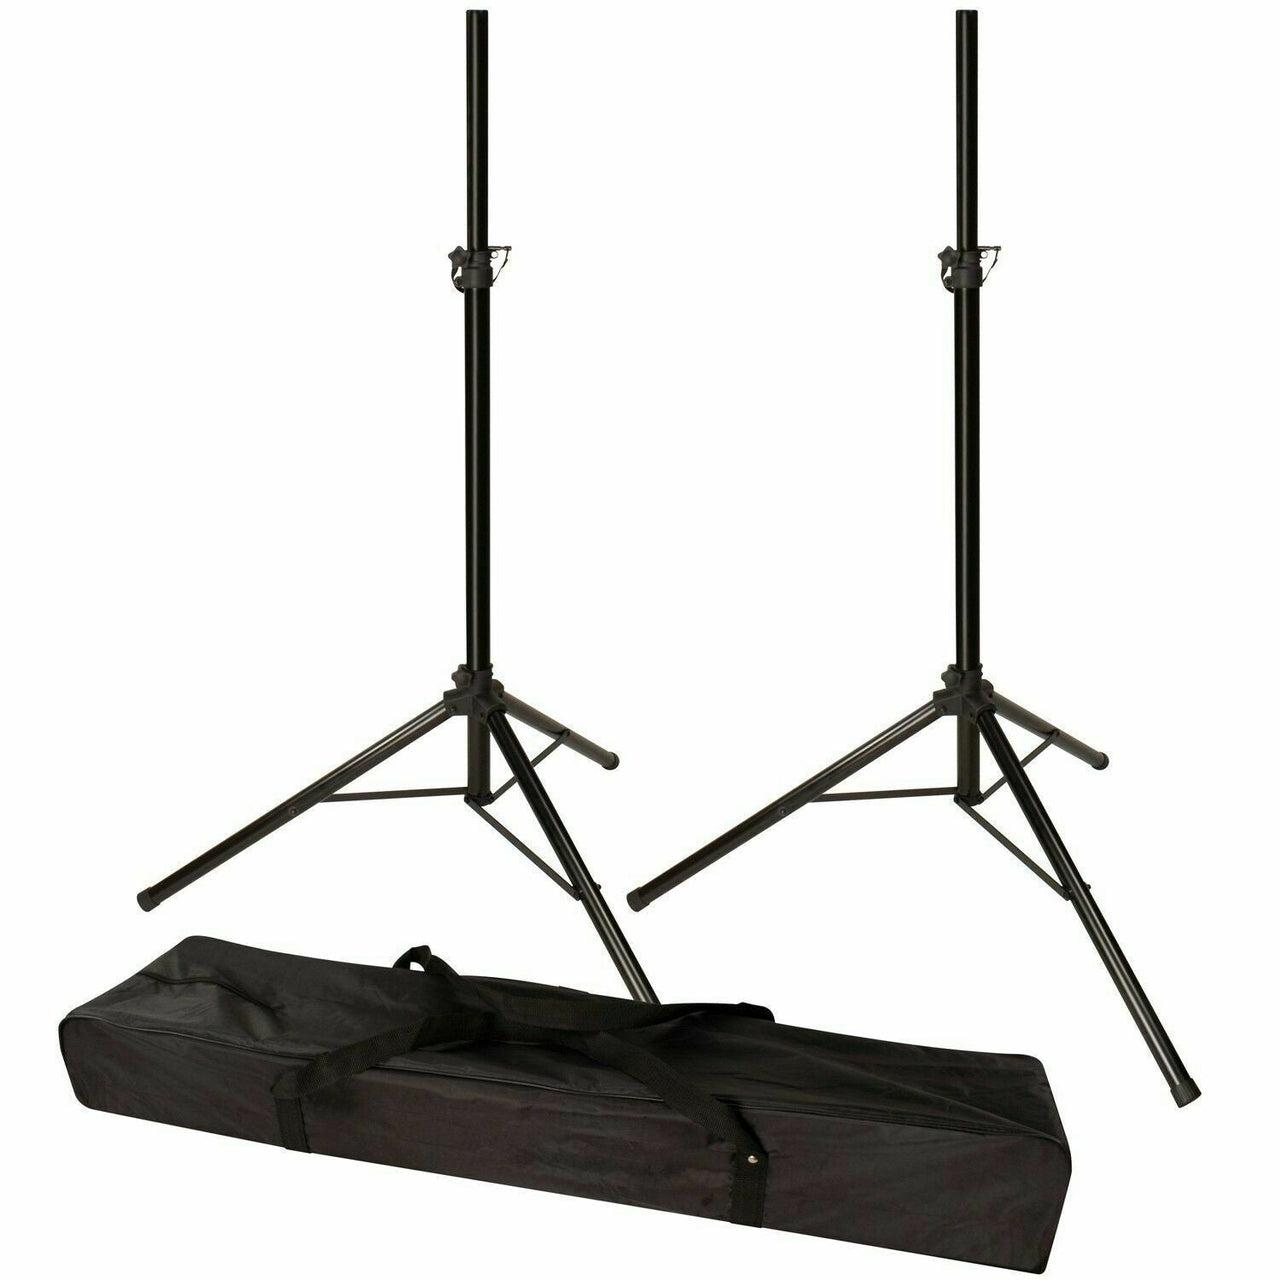 (2) MR DJ SS300B Speaker Stand with Road Carrying Bag Universal Black Heavy Duty Folding Tripod PRO PA DJ Home On Stage Speaker Stand Mount Holder with Road Carrying Bag